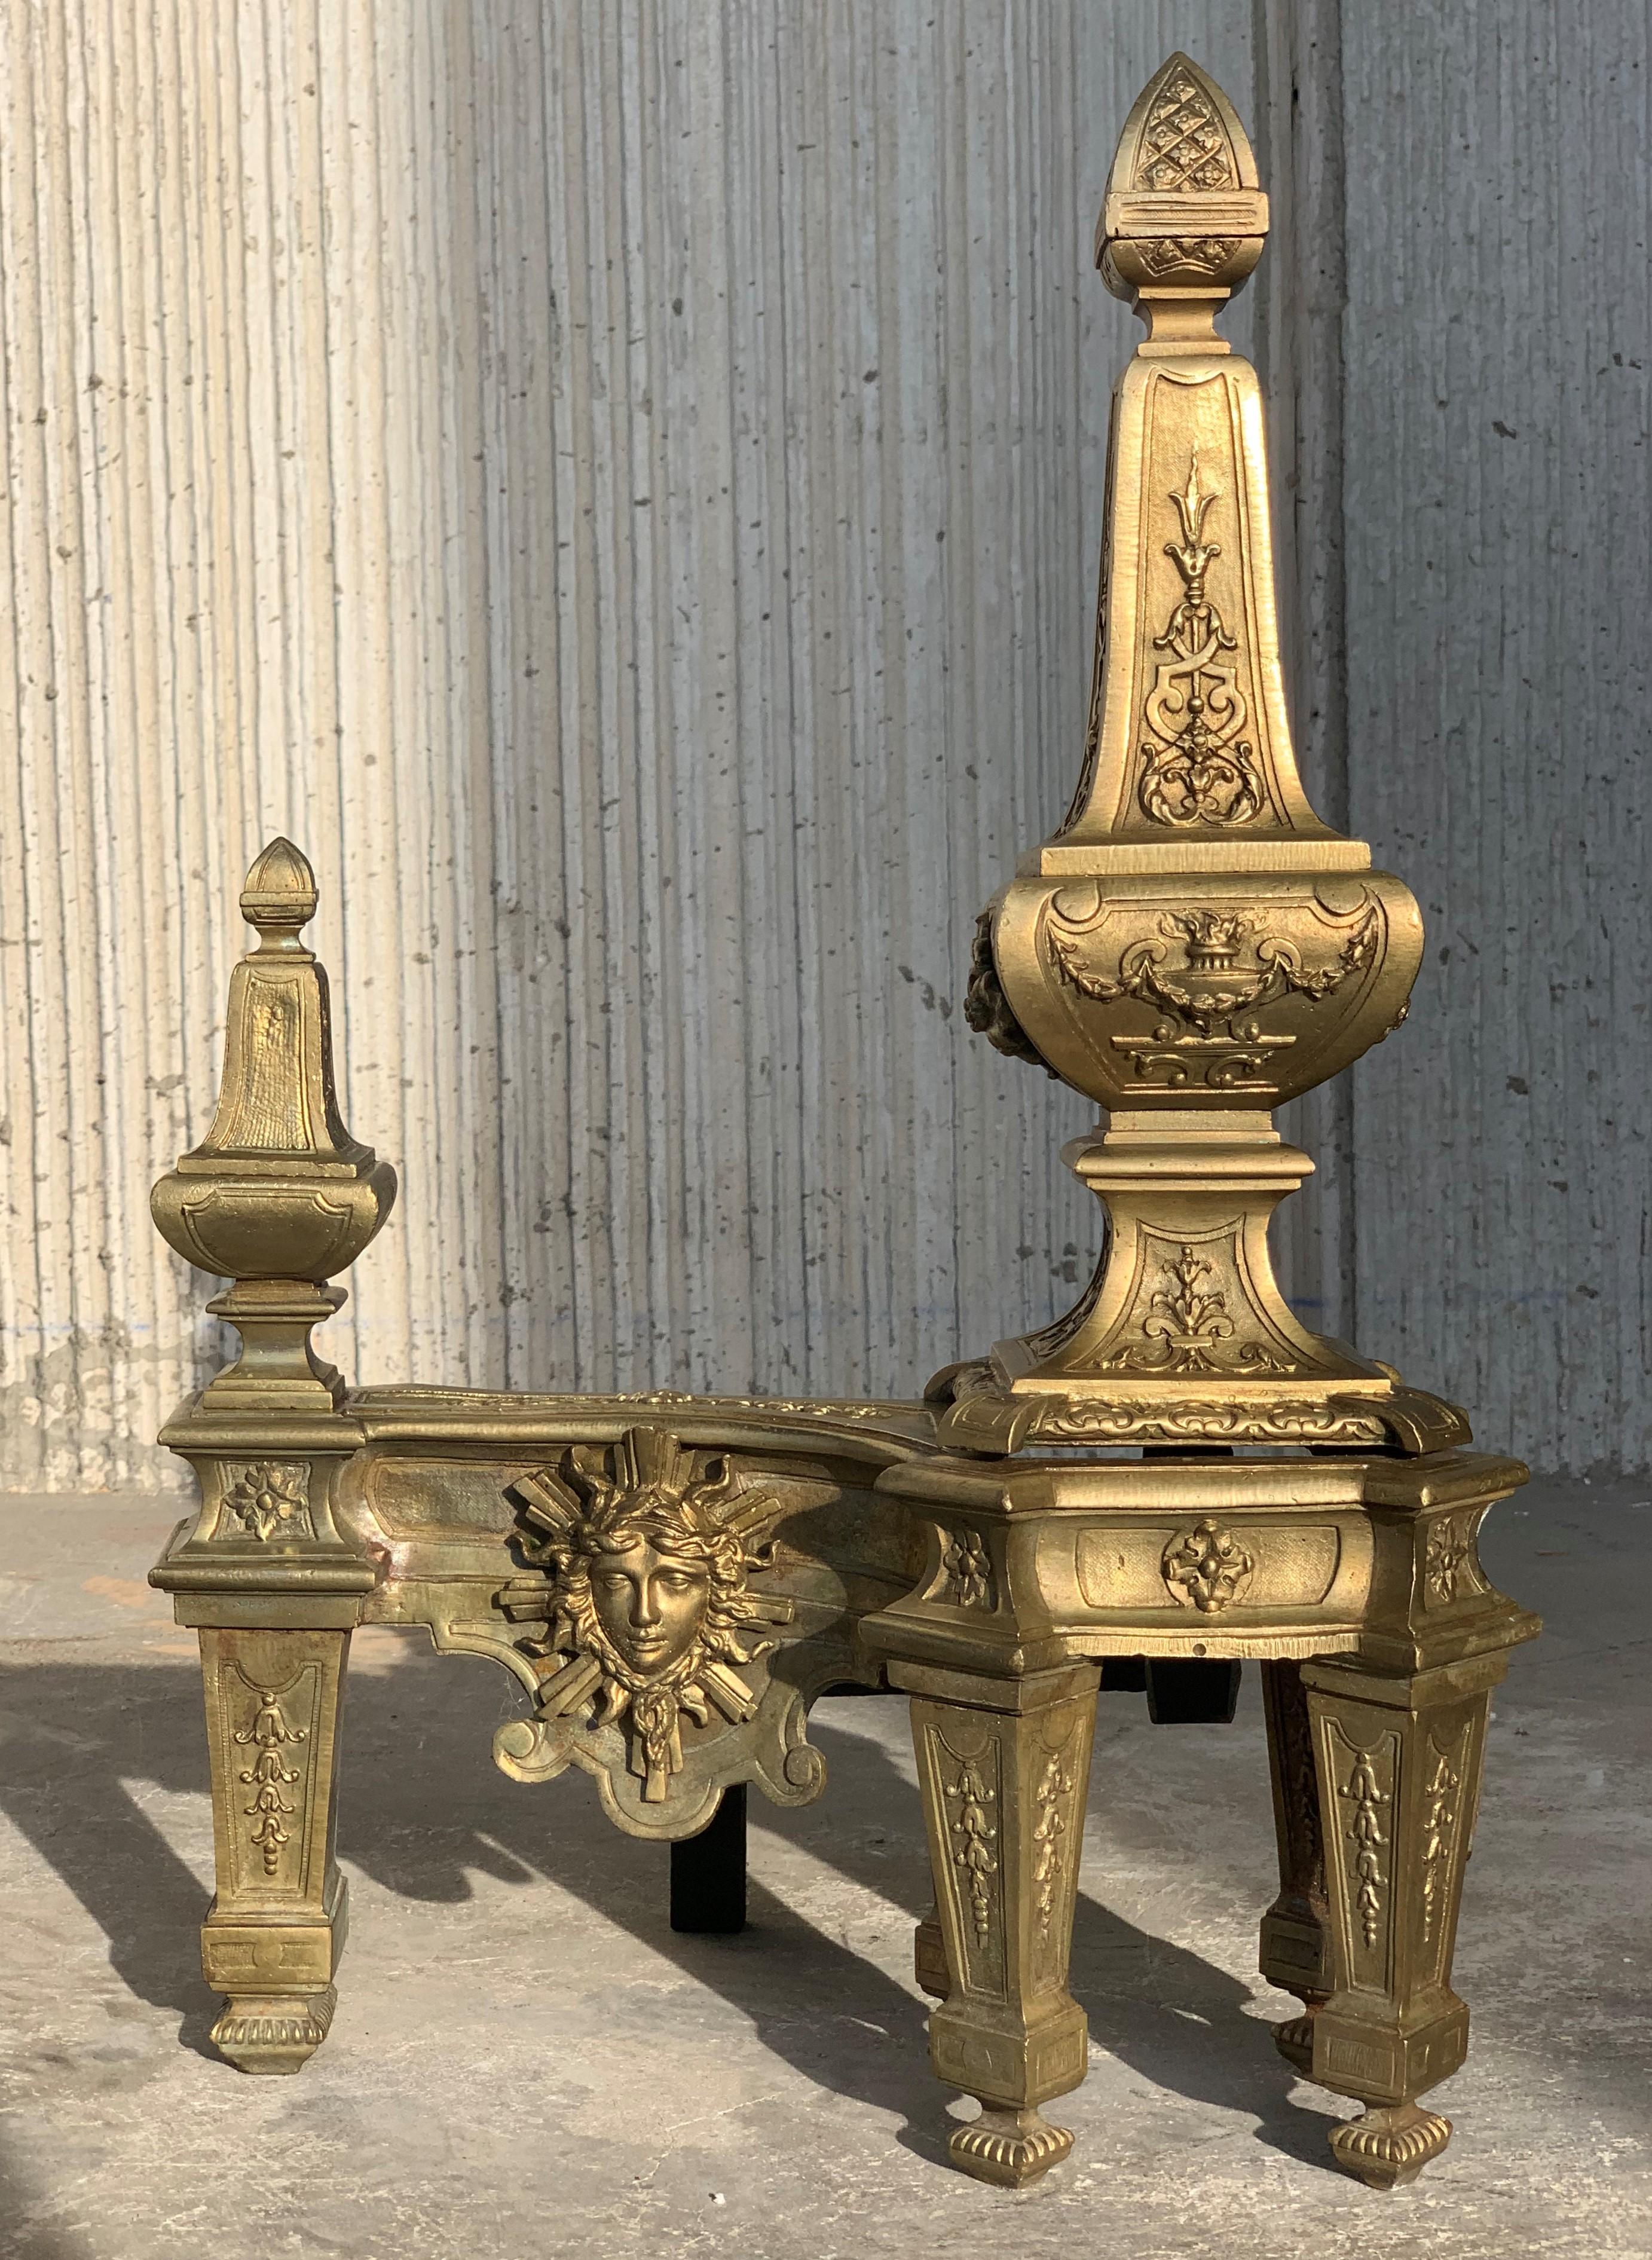 Superb set of antique French andirons.
This set of double barred Louis XVI style andirons work
Restored, Great condition, perfect decorative and useable pieces.
 